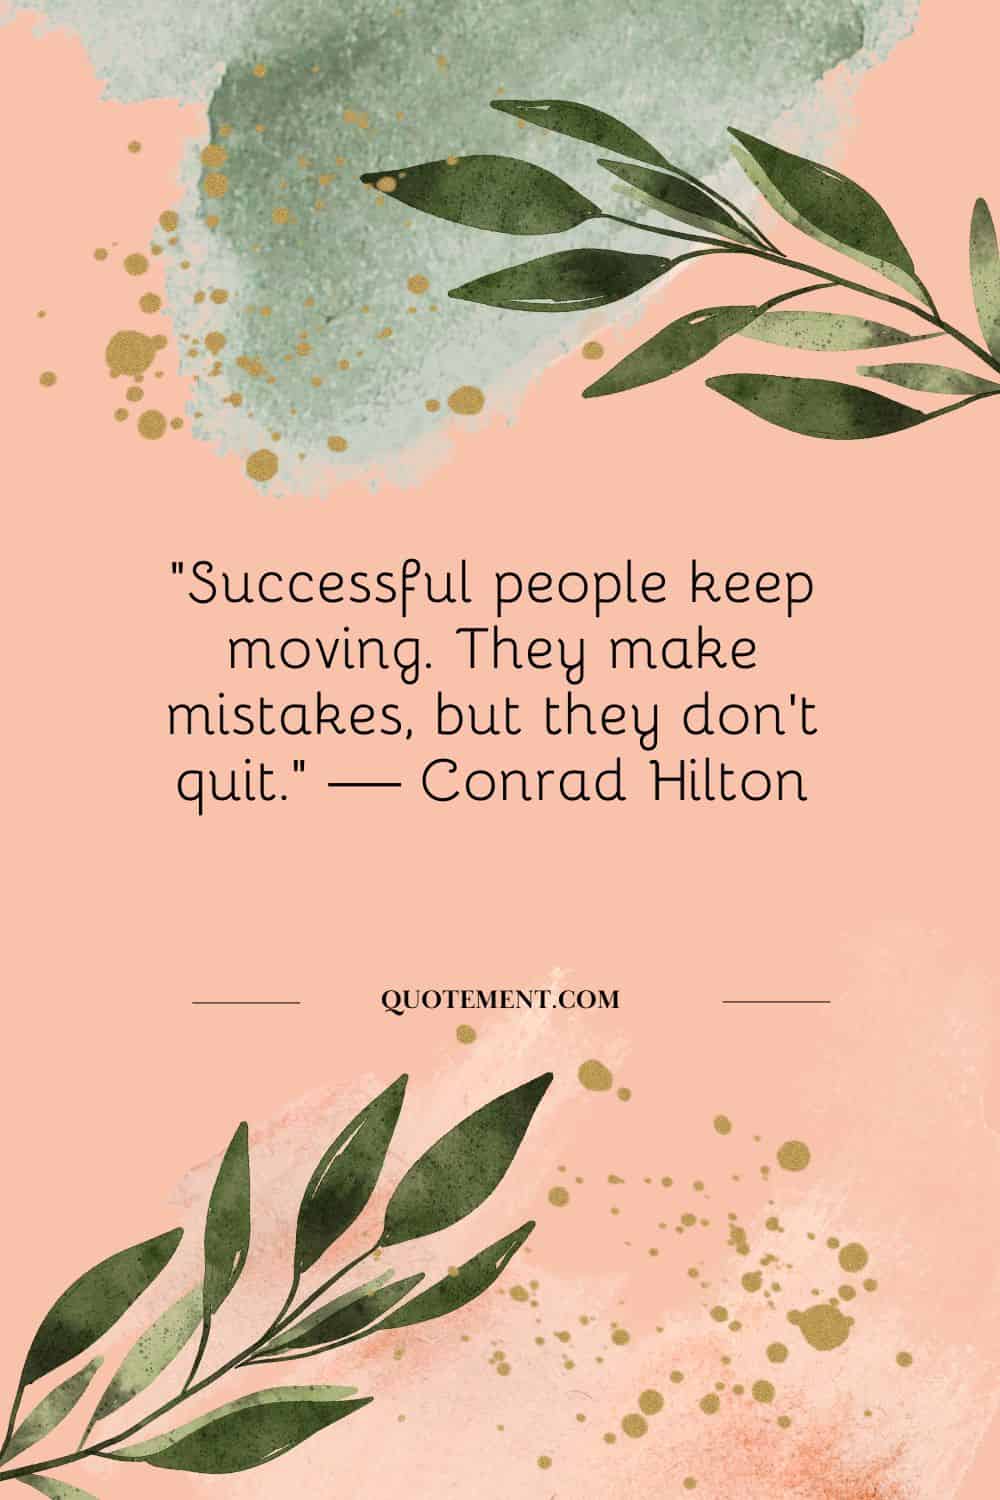 “Successful people keep moving. They make mistakes, but they don’t quit.” — Conrad Hilton